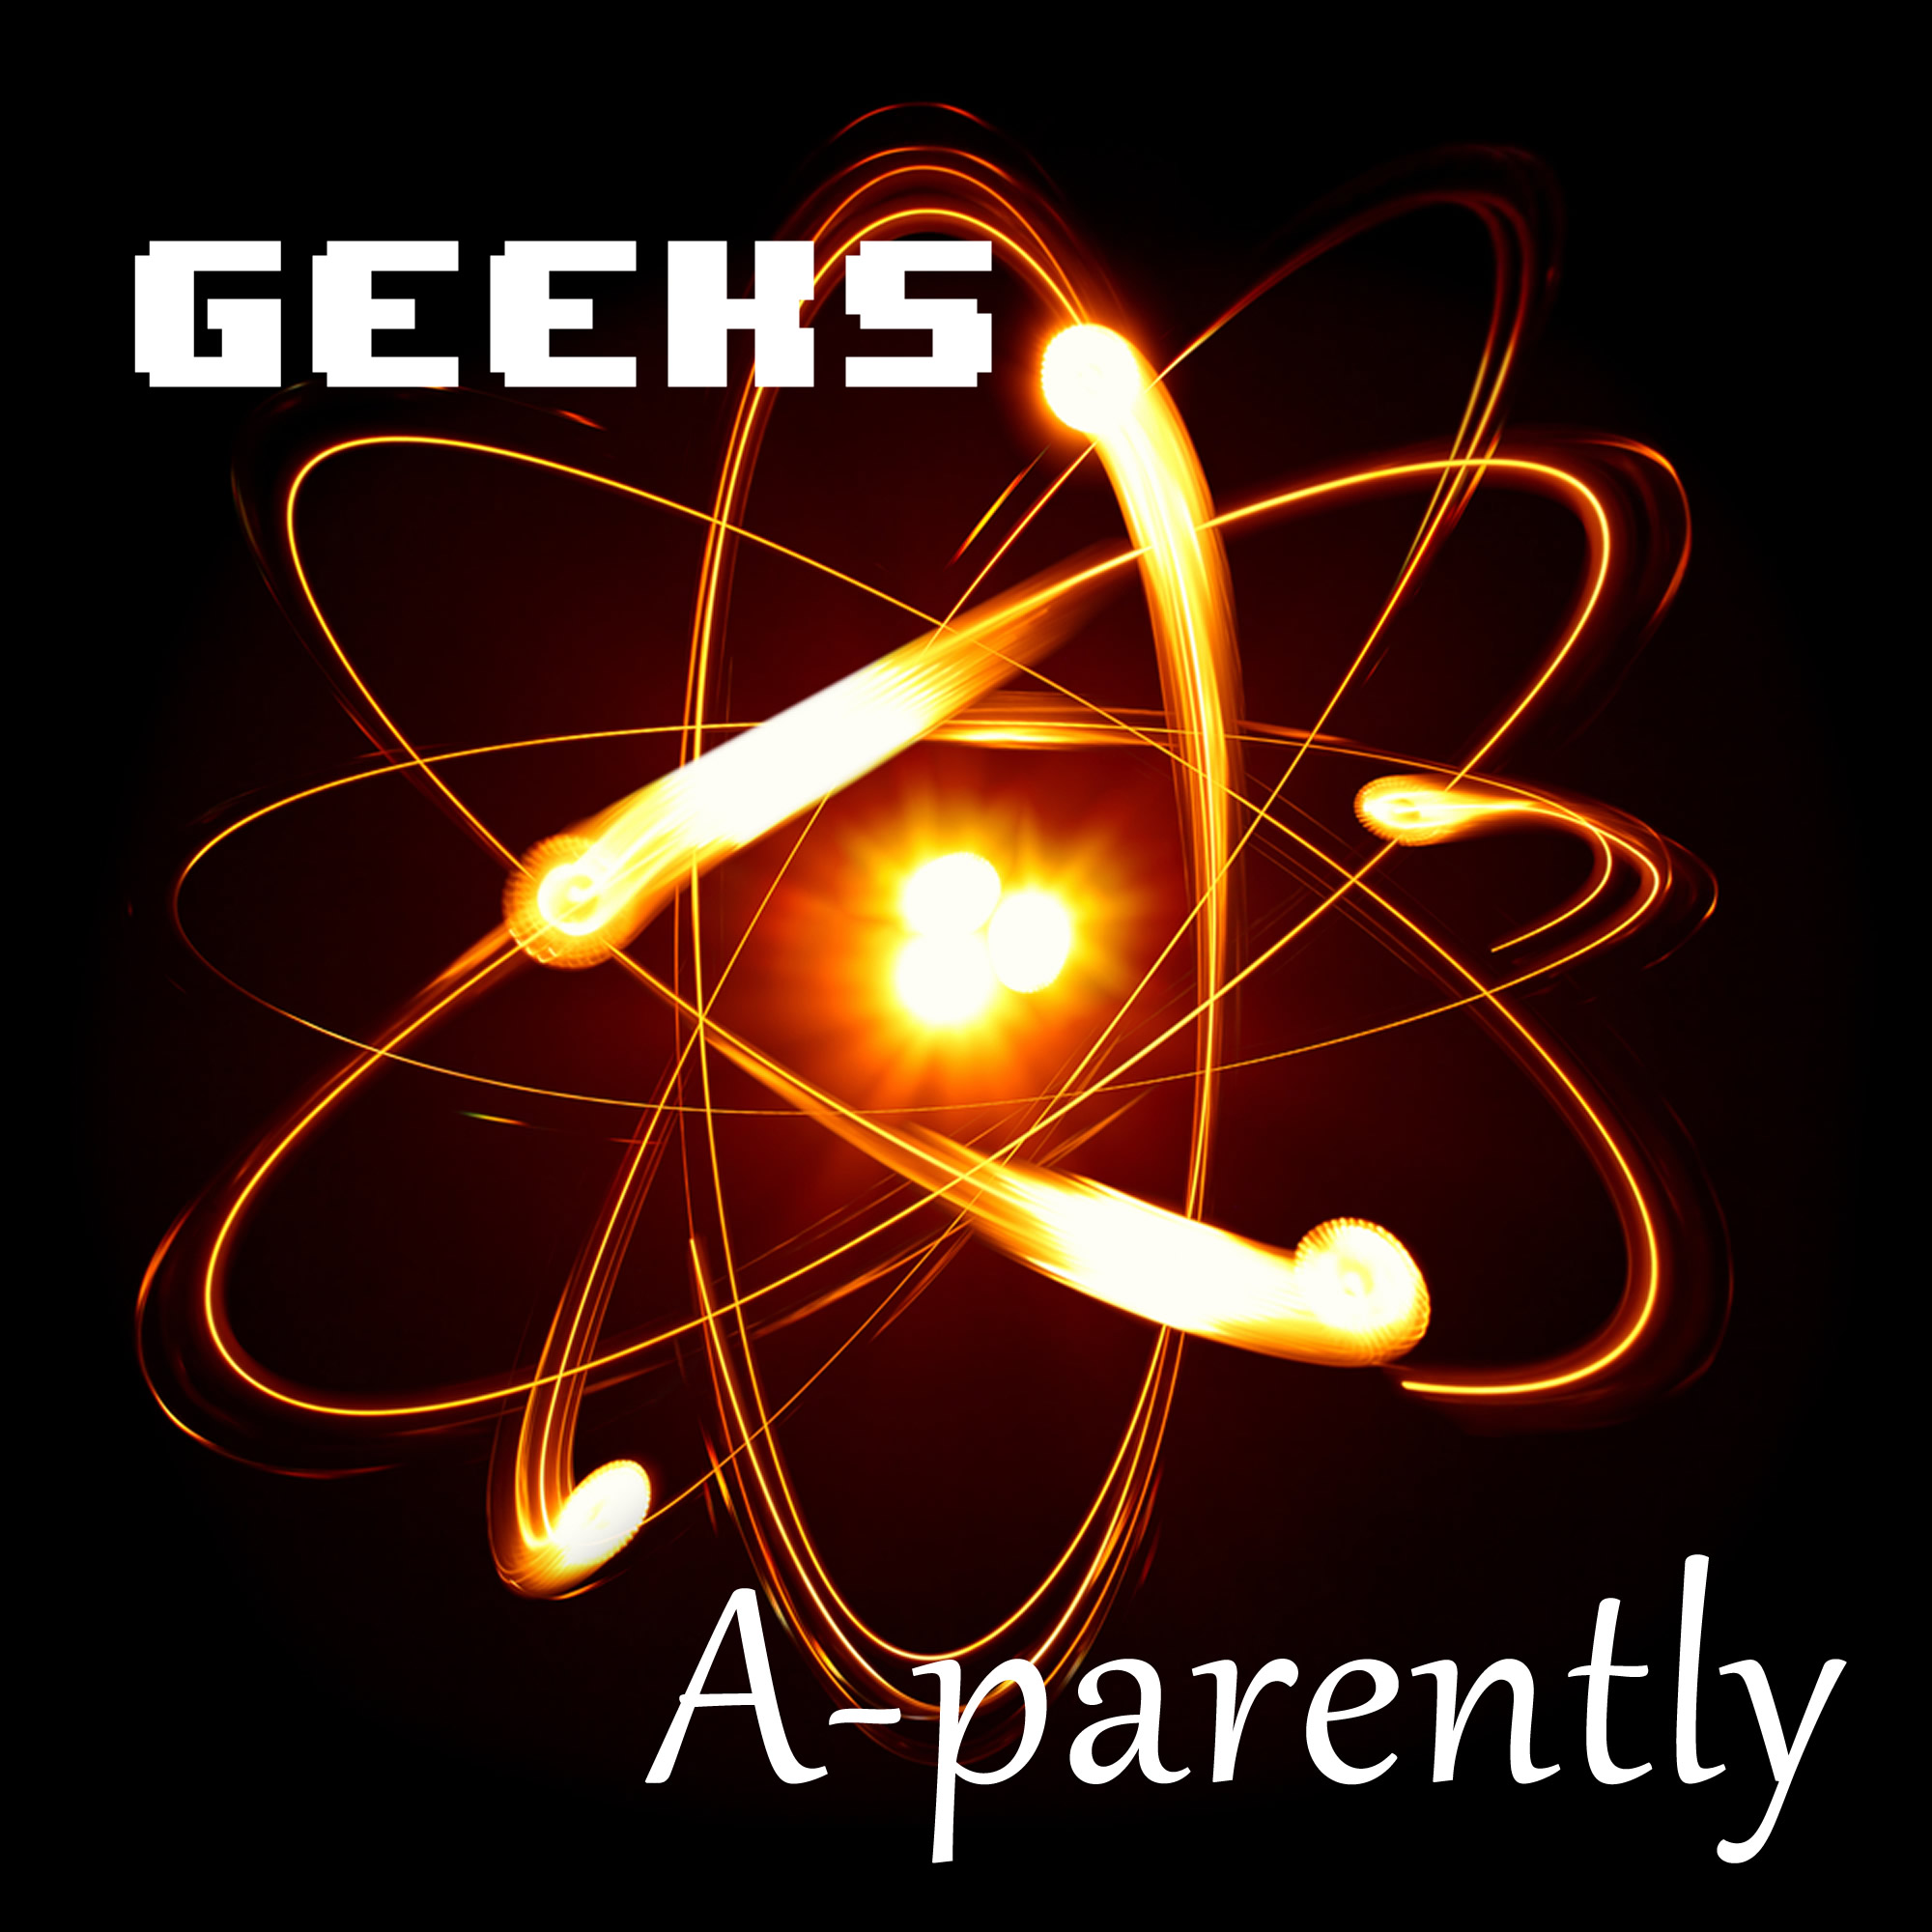 Geeks Apparently